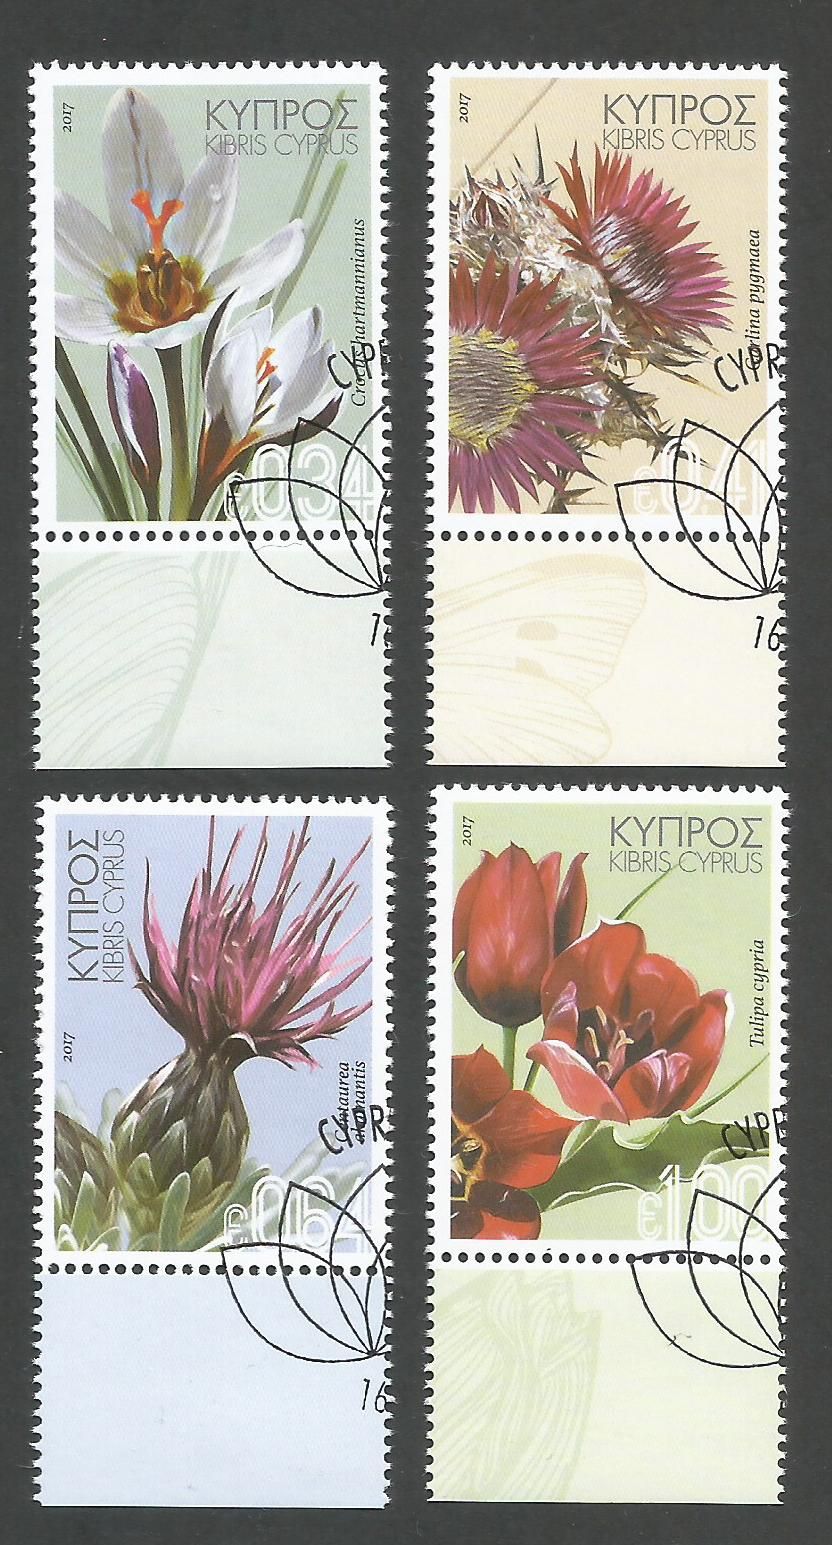 Cyprus Stamps SG 2017 (a) Wild Flowers - CTO USED (k474)